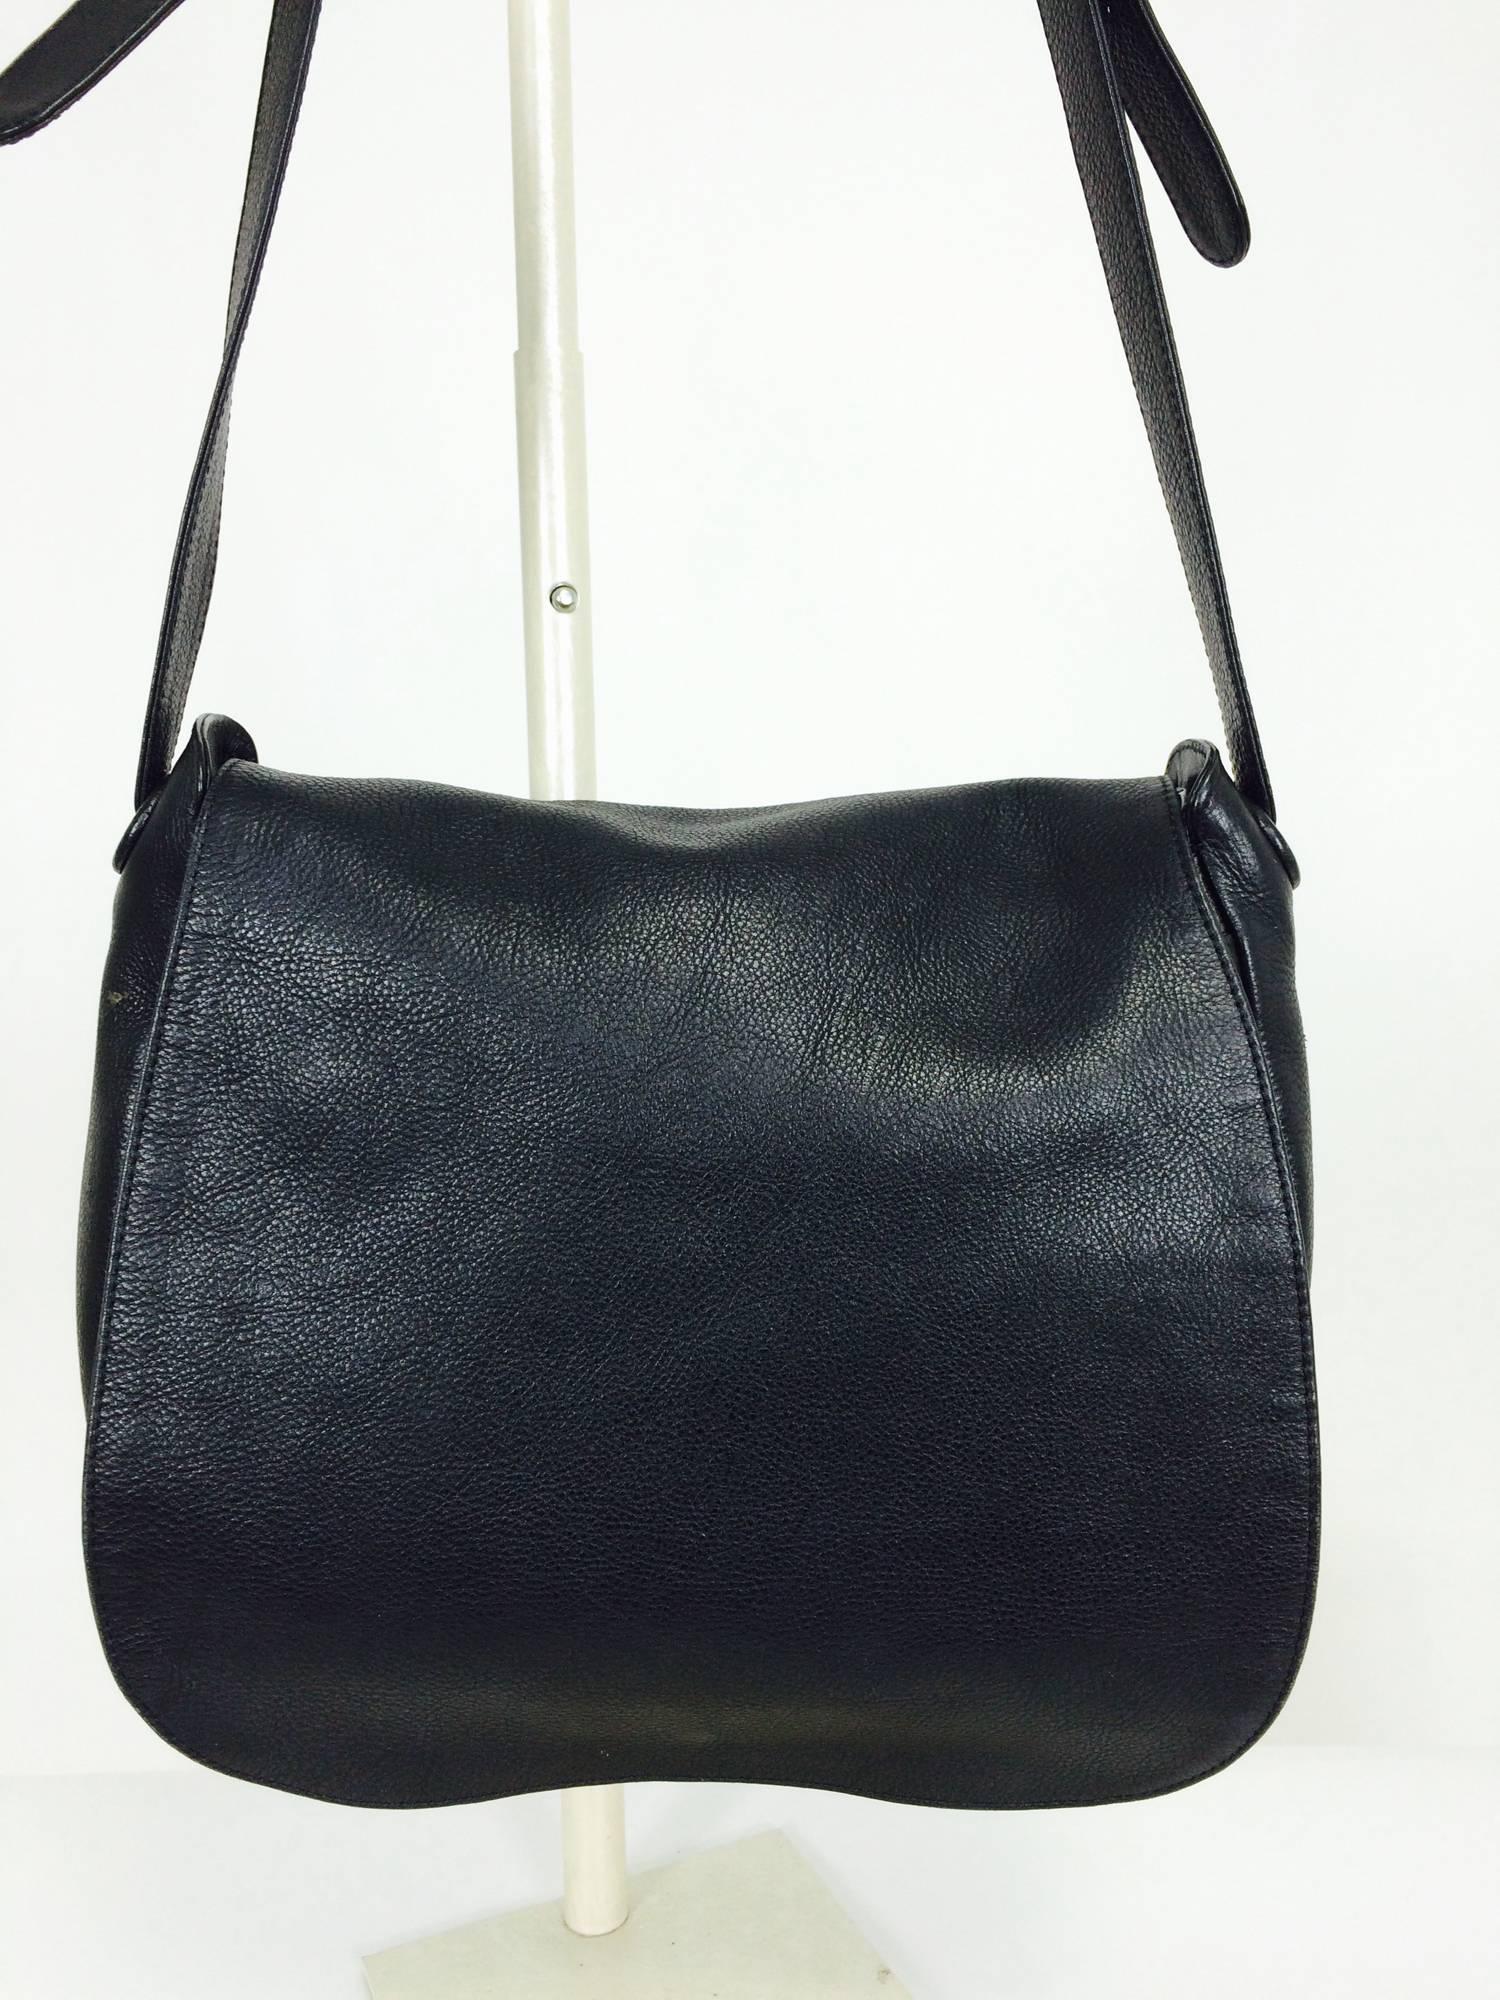 DeVecchi large pebbled black leather flap front corss body/shoulder bag 1990s...From the 1990s when things were less flashy and less logo/hardware-y...A great bag in a beautiful pebble leather...Deep flap front leather lined (hidden magnetic snap